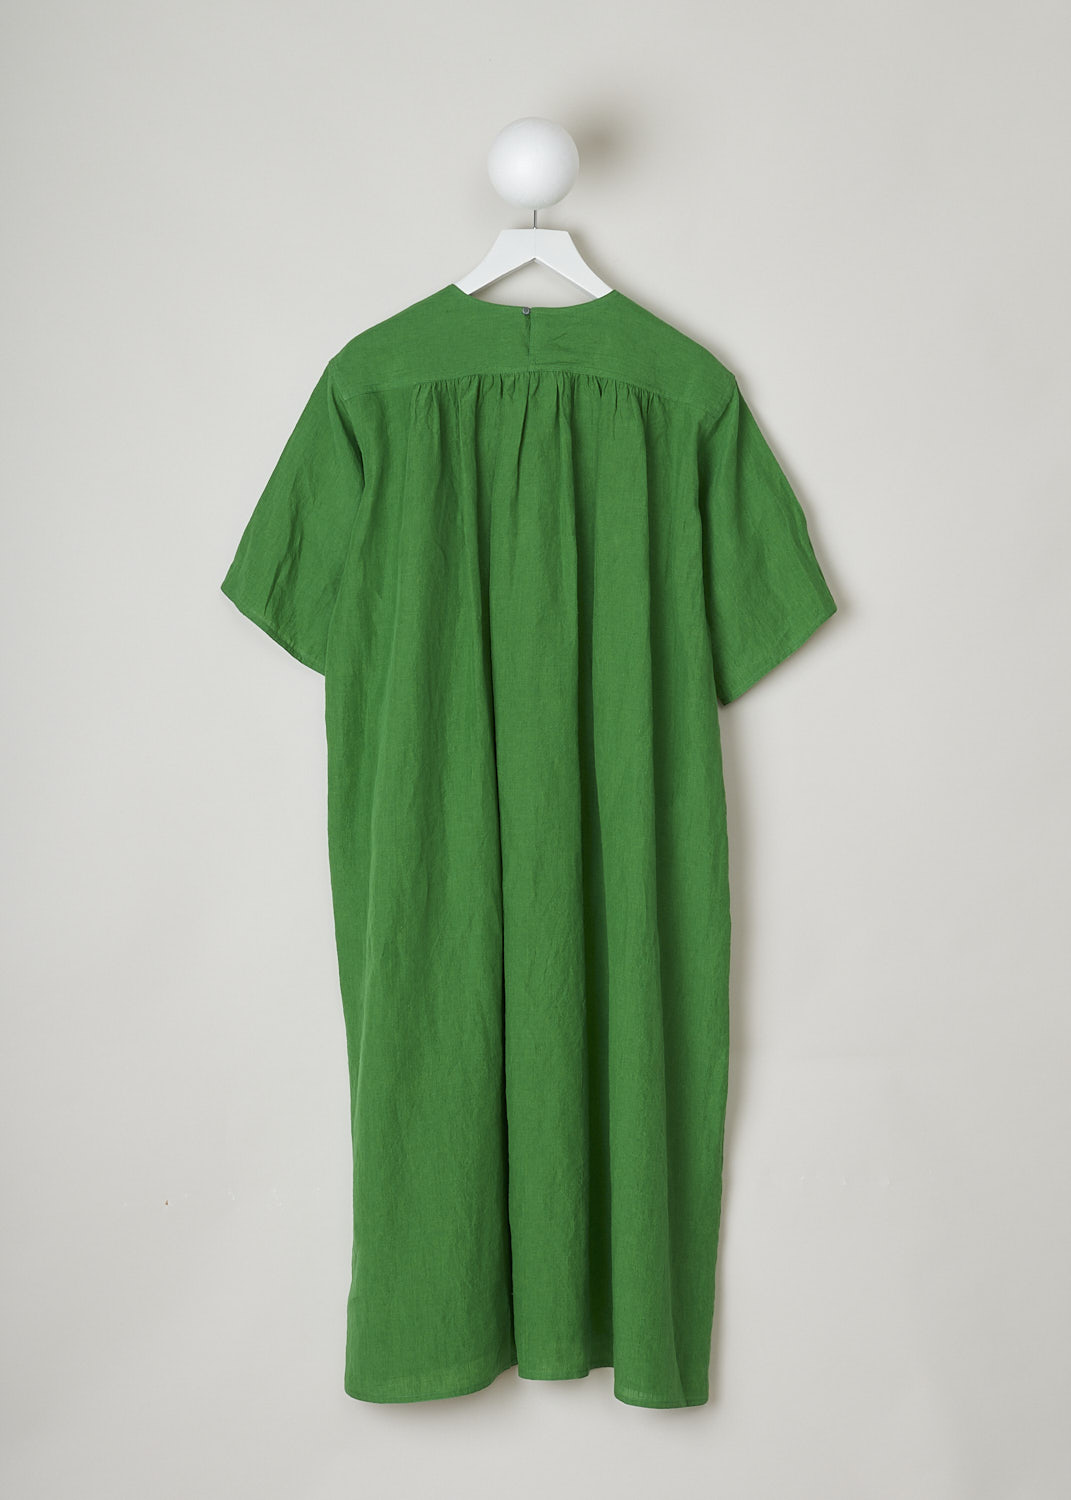 SOFIE Dâ€™HOORE, BRIGHT GREEN LINEN DARNELLE DRESS, DARNELLE_LIFE_GRASS, Green, Back, This oversized green midi dress features a round neckline, dropped shoulders and short sleeves. The A-line dress has a square bib-like front with pleated details below. Concealed in the side seams, slanted pockets can be found. The dress has a straight hemline with slits on either side. 

